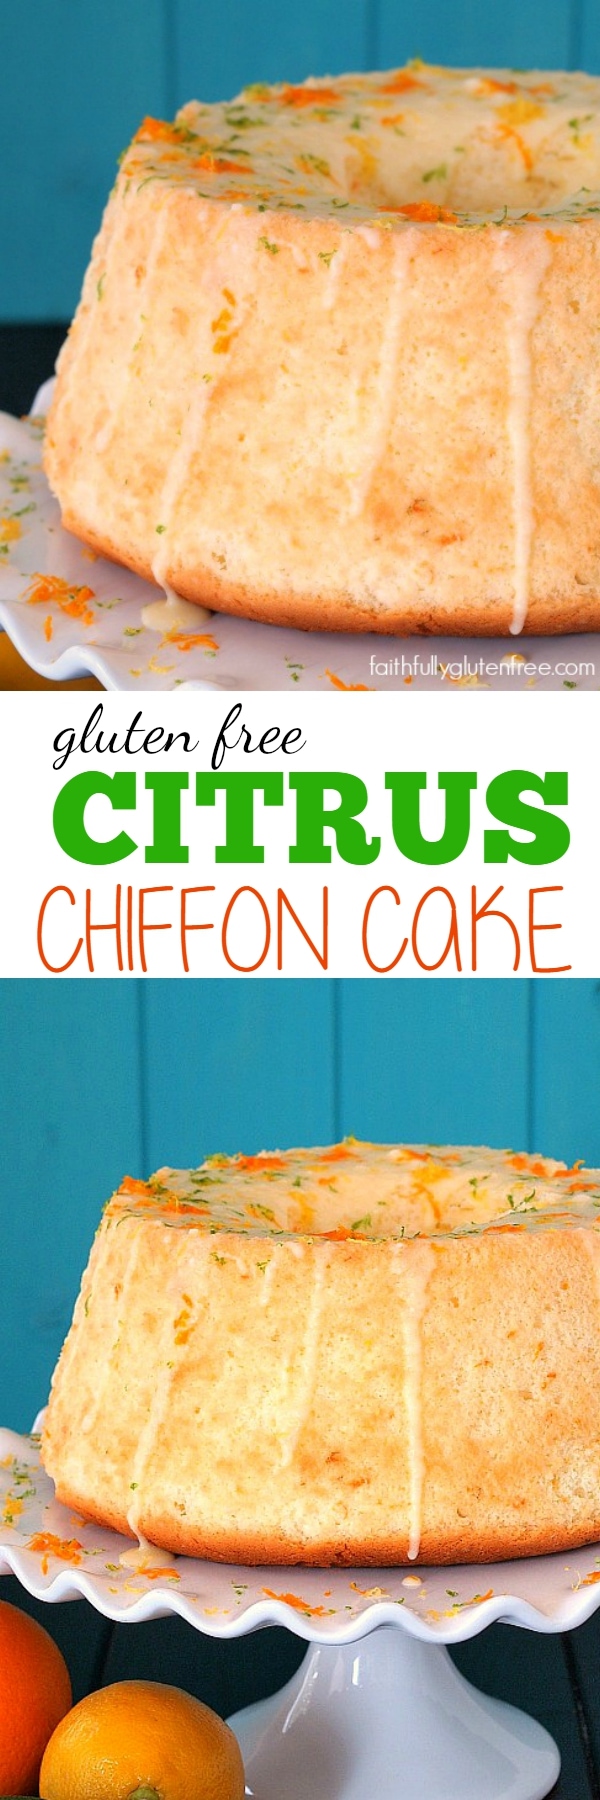 Filled with lemon, lime, and orange zest, this Gluten Free Citrus Chiffon Cake is a ray of sunshine on an otherwise cloudy day.